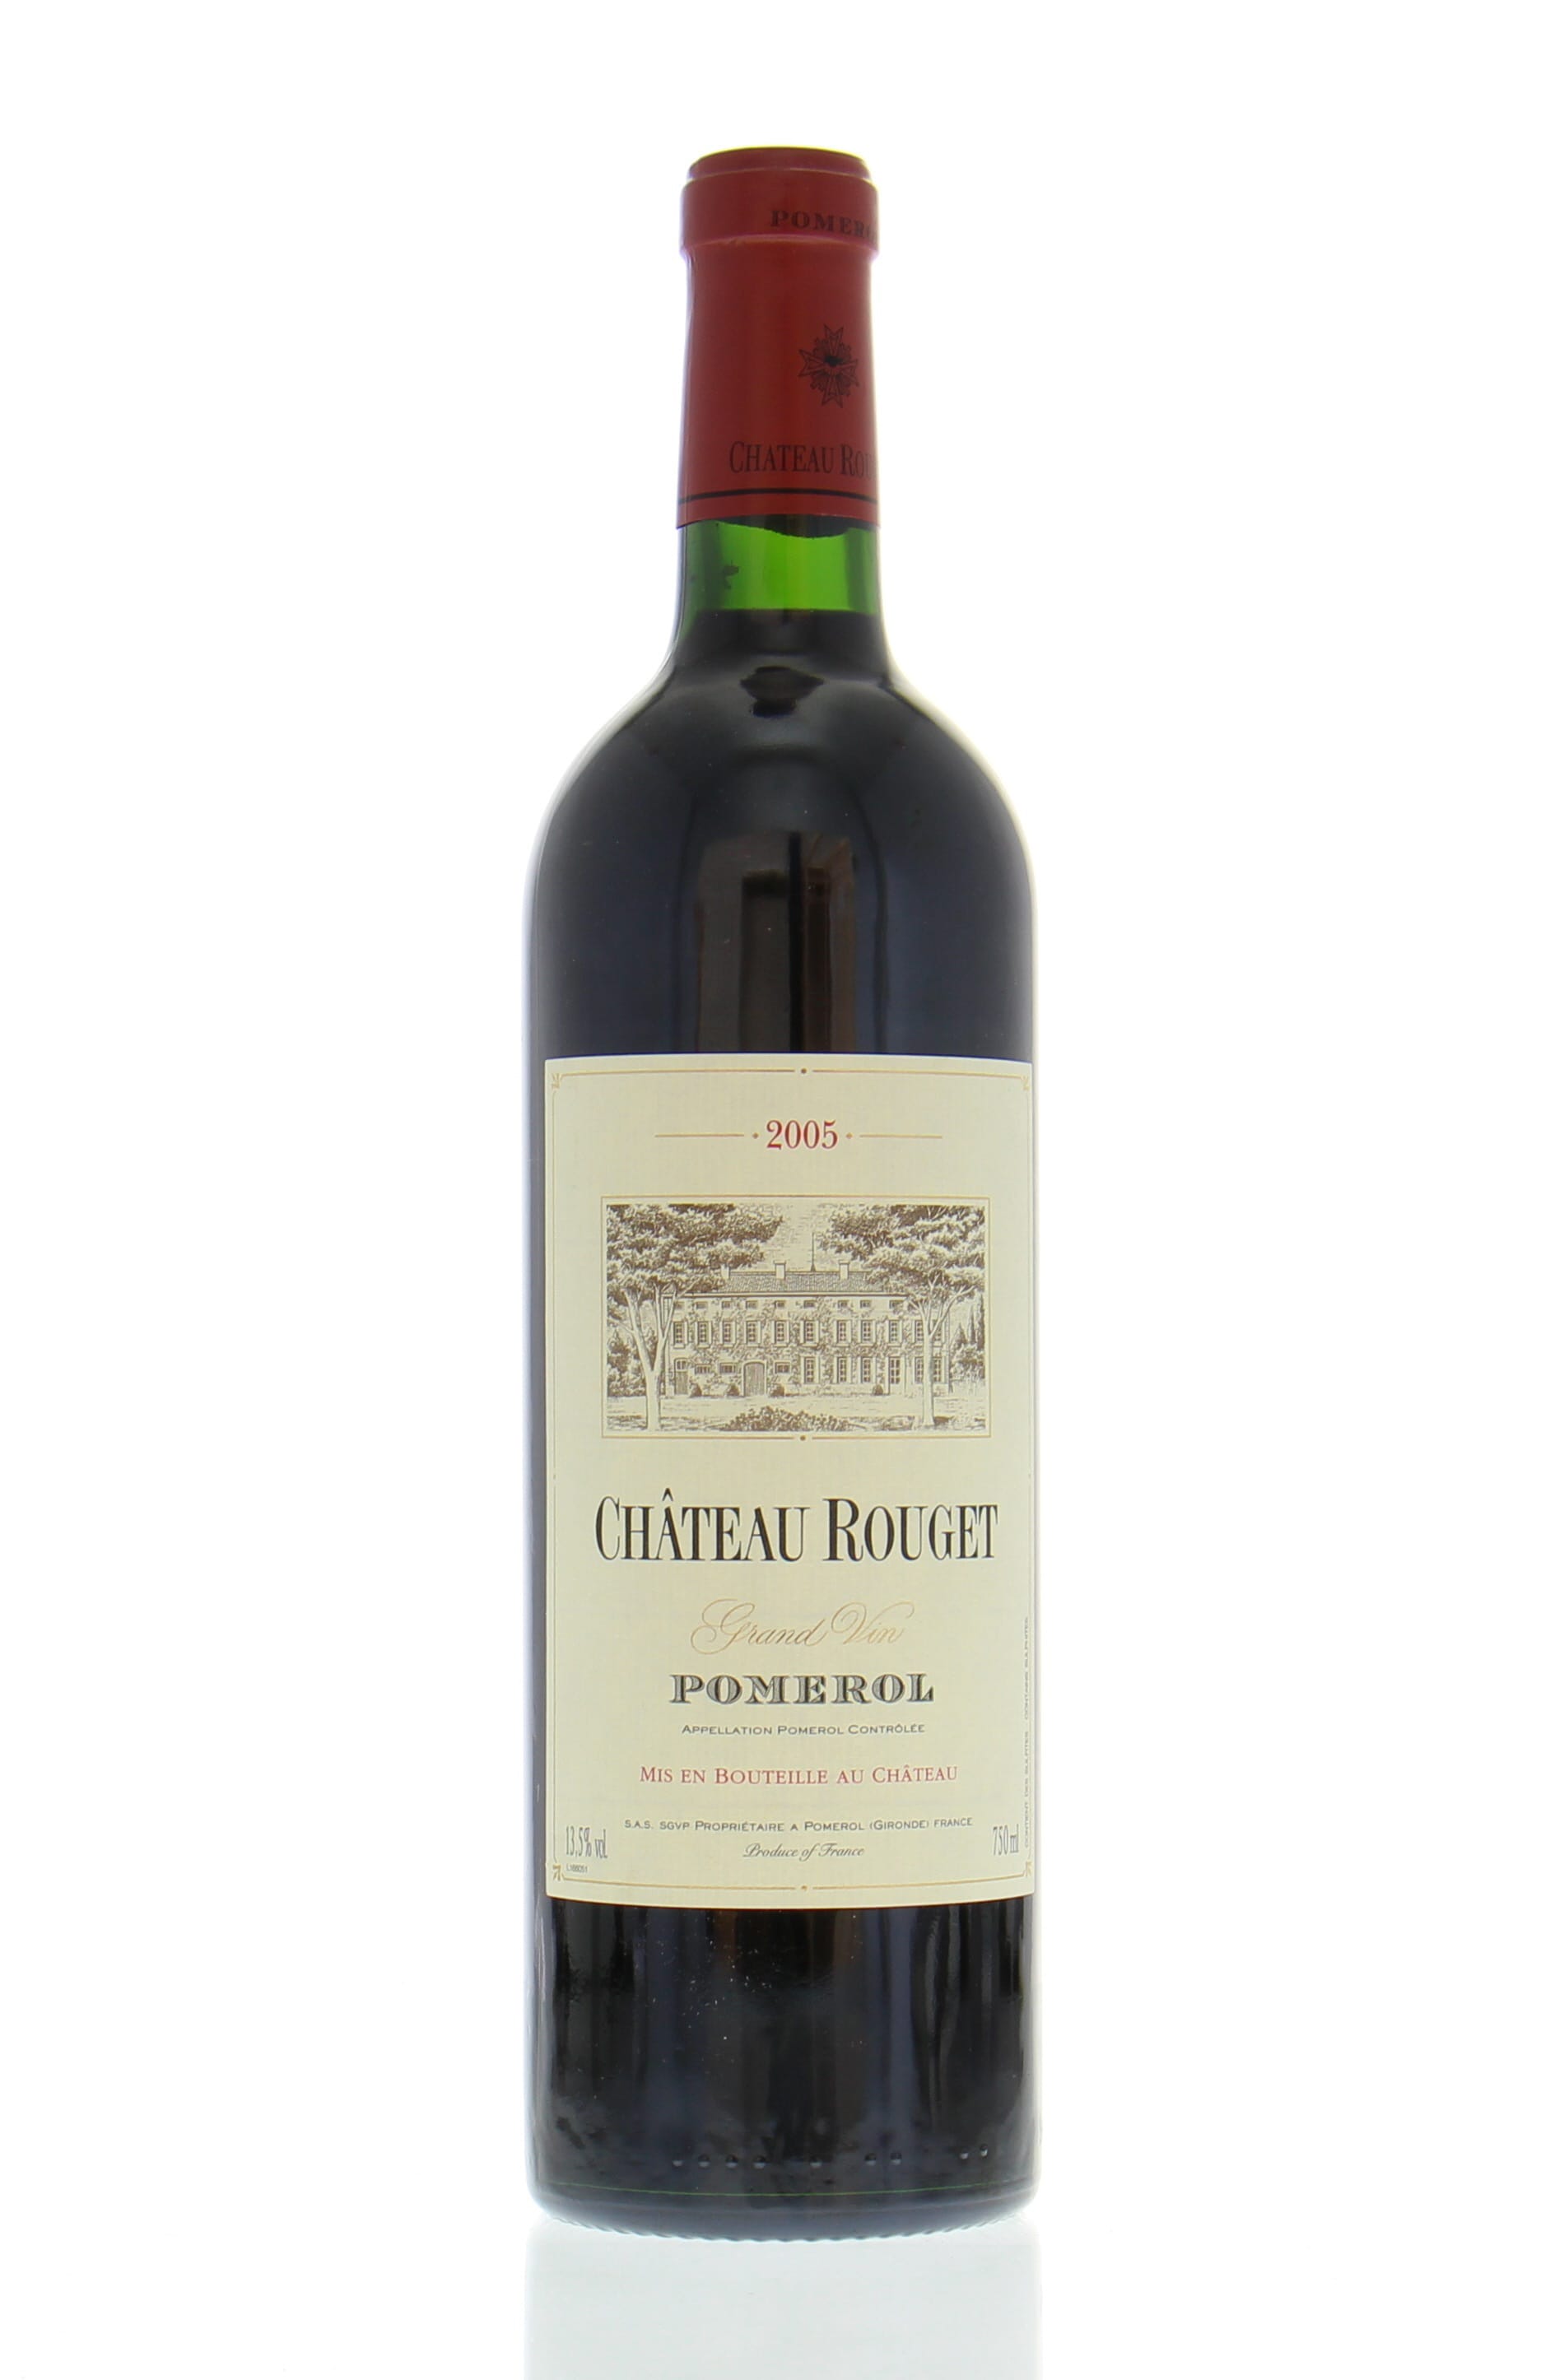 Chateau Rouget - Chateau Rouget 2005 Perfect